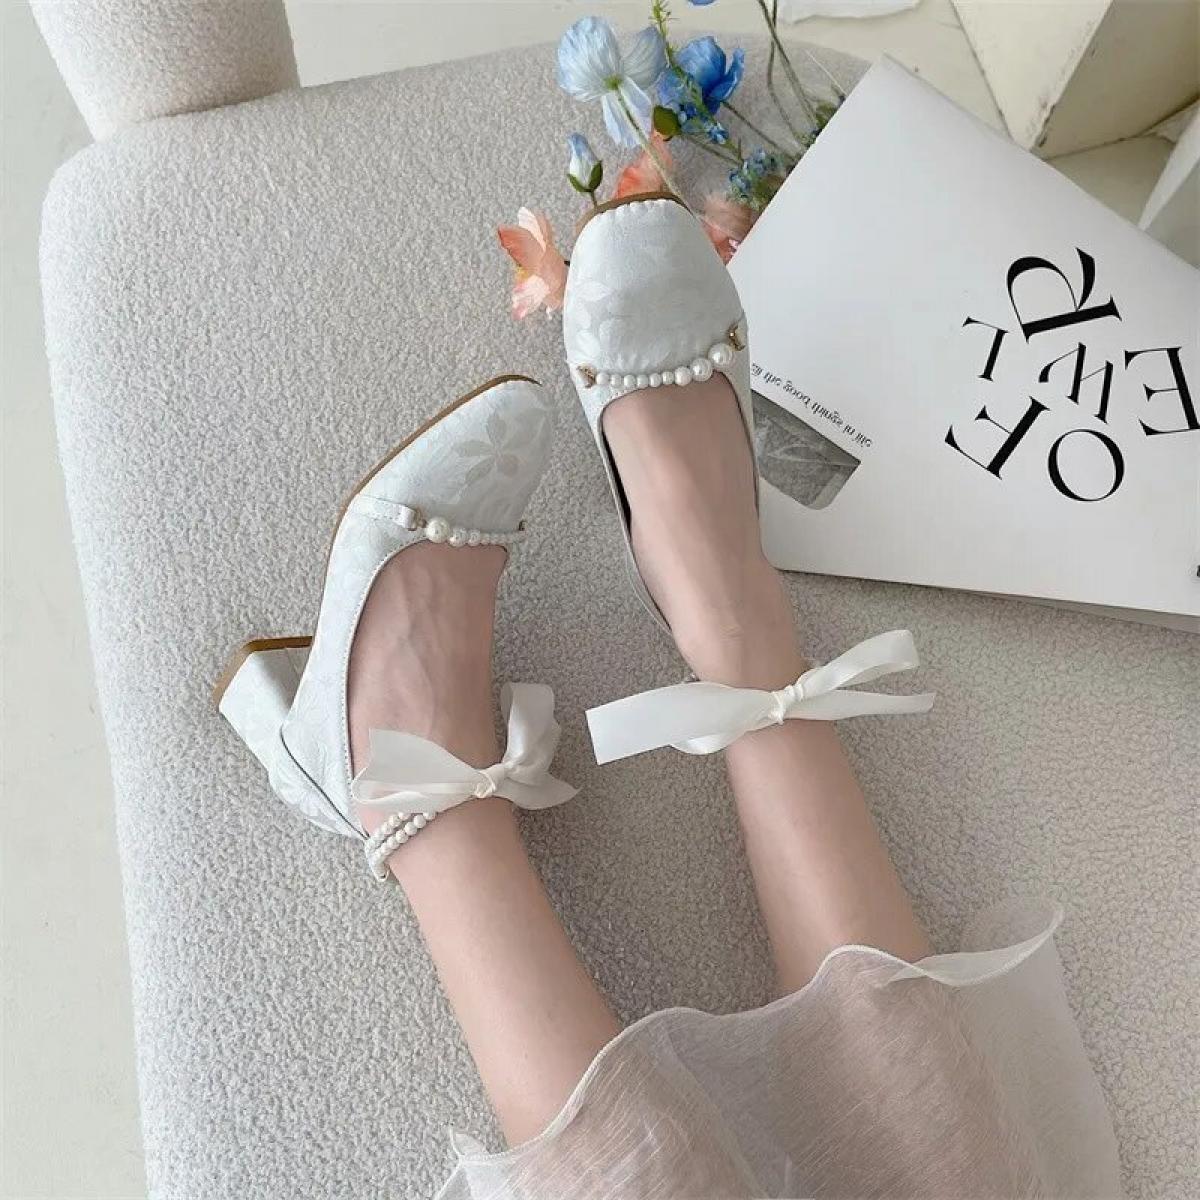 Shoes Women High Heels Spring Autumn Full With Casual Chinese New One Buckle Chain Beaded Elegant Fashion Banquet High H